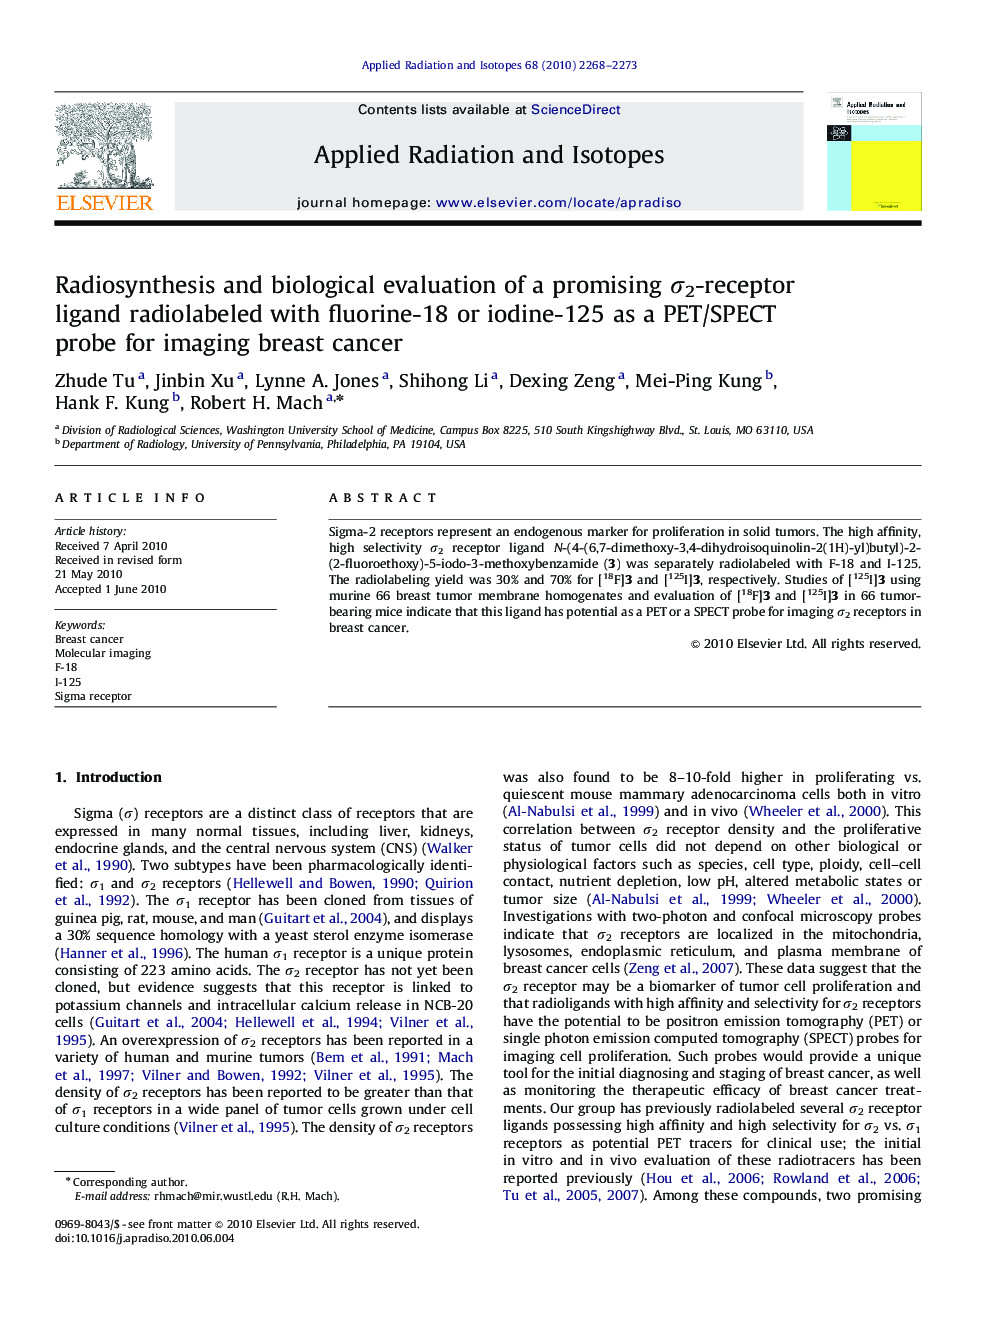 Radiosynthesis and biological evaluation of a promising σ2-receptor ligand radiolabeled with fluorine-18 or iodine-125 as a PET/SPECT probe for imaging breast cancer